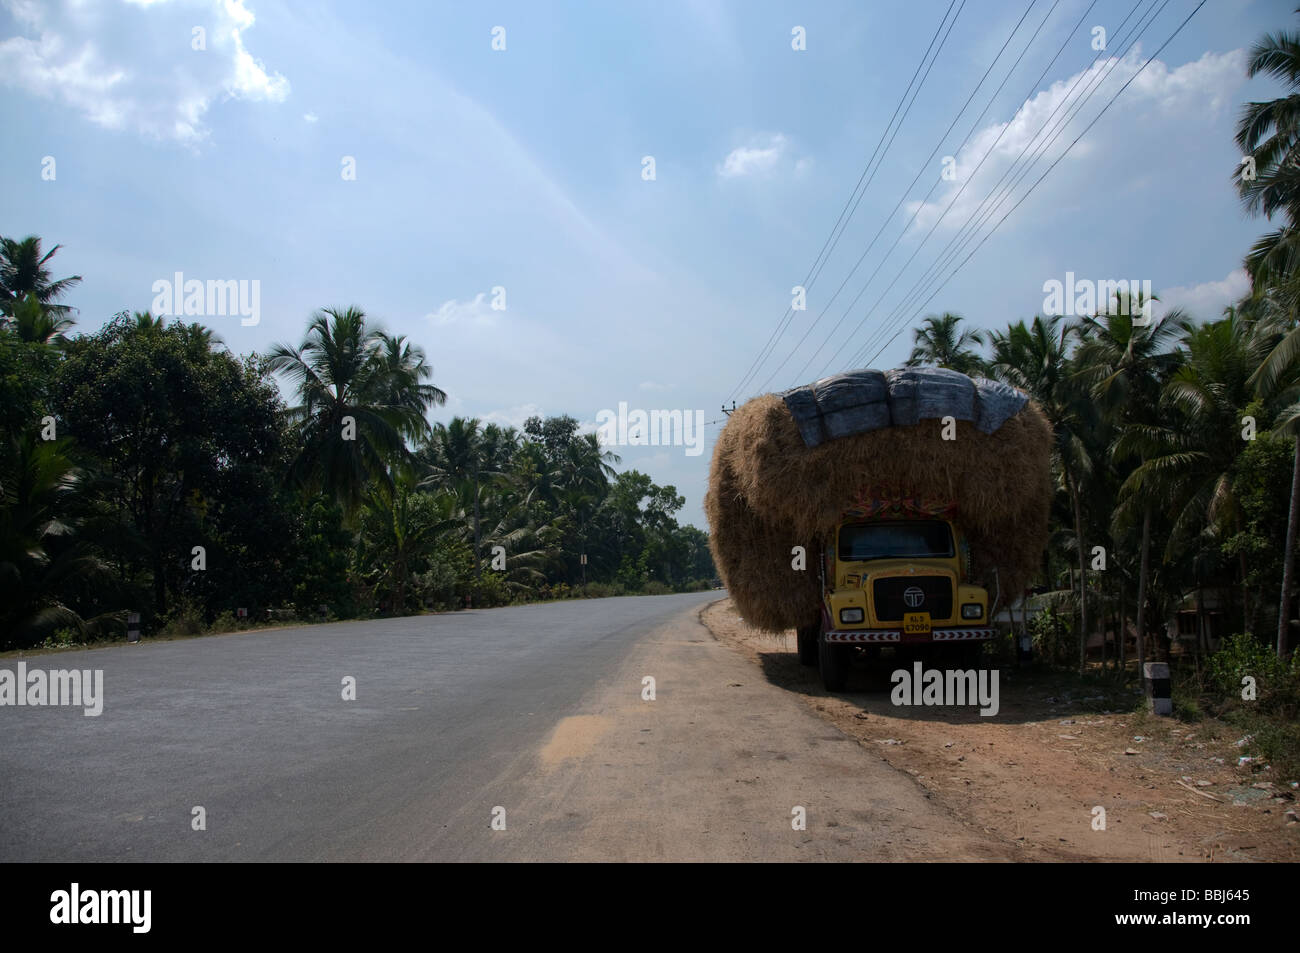 Truck Carrying Hay on the roadside kerala india Stock Photo